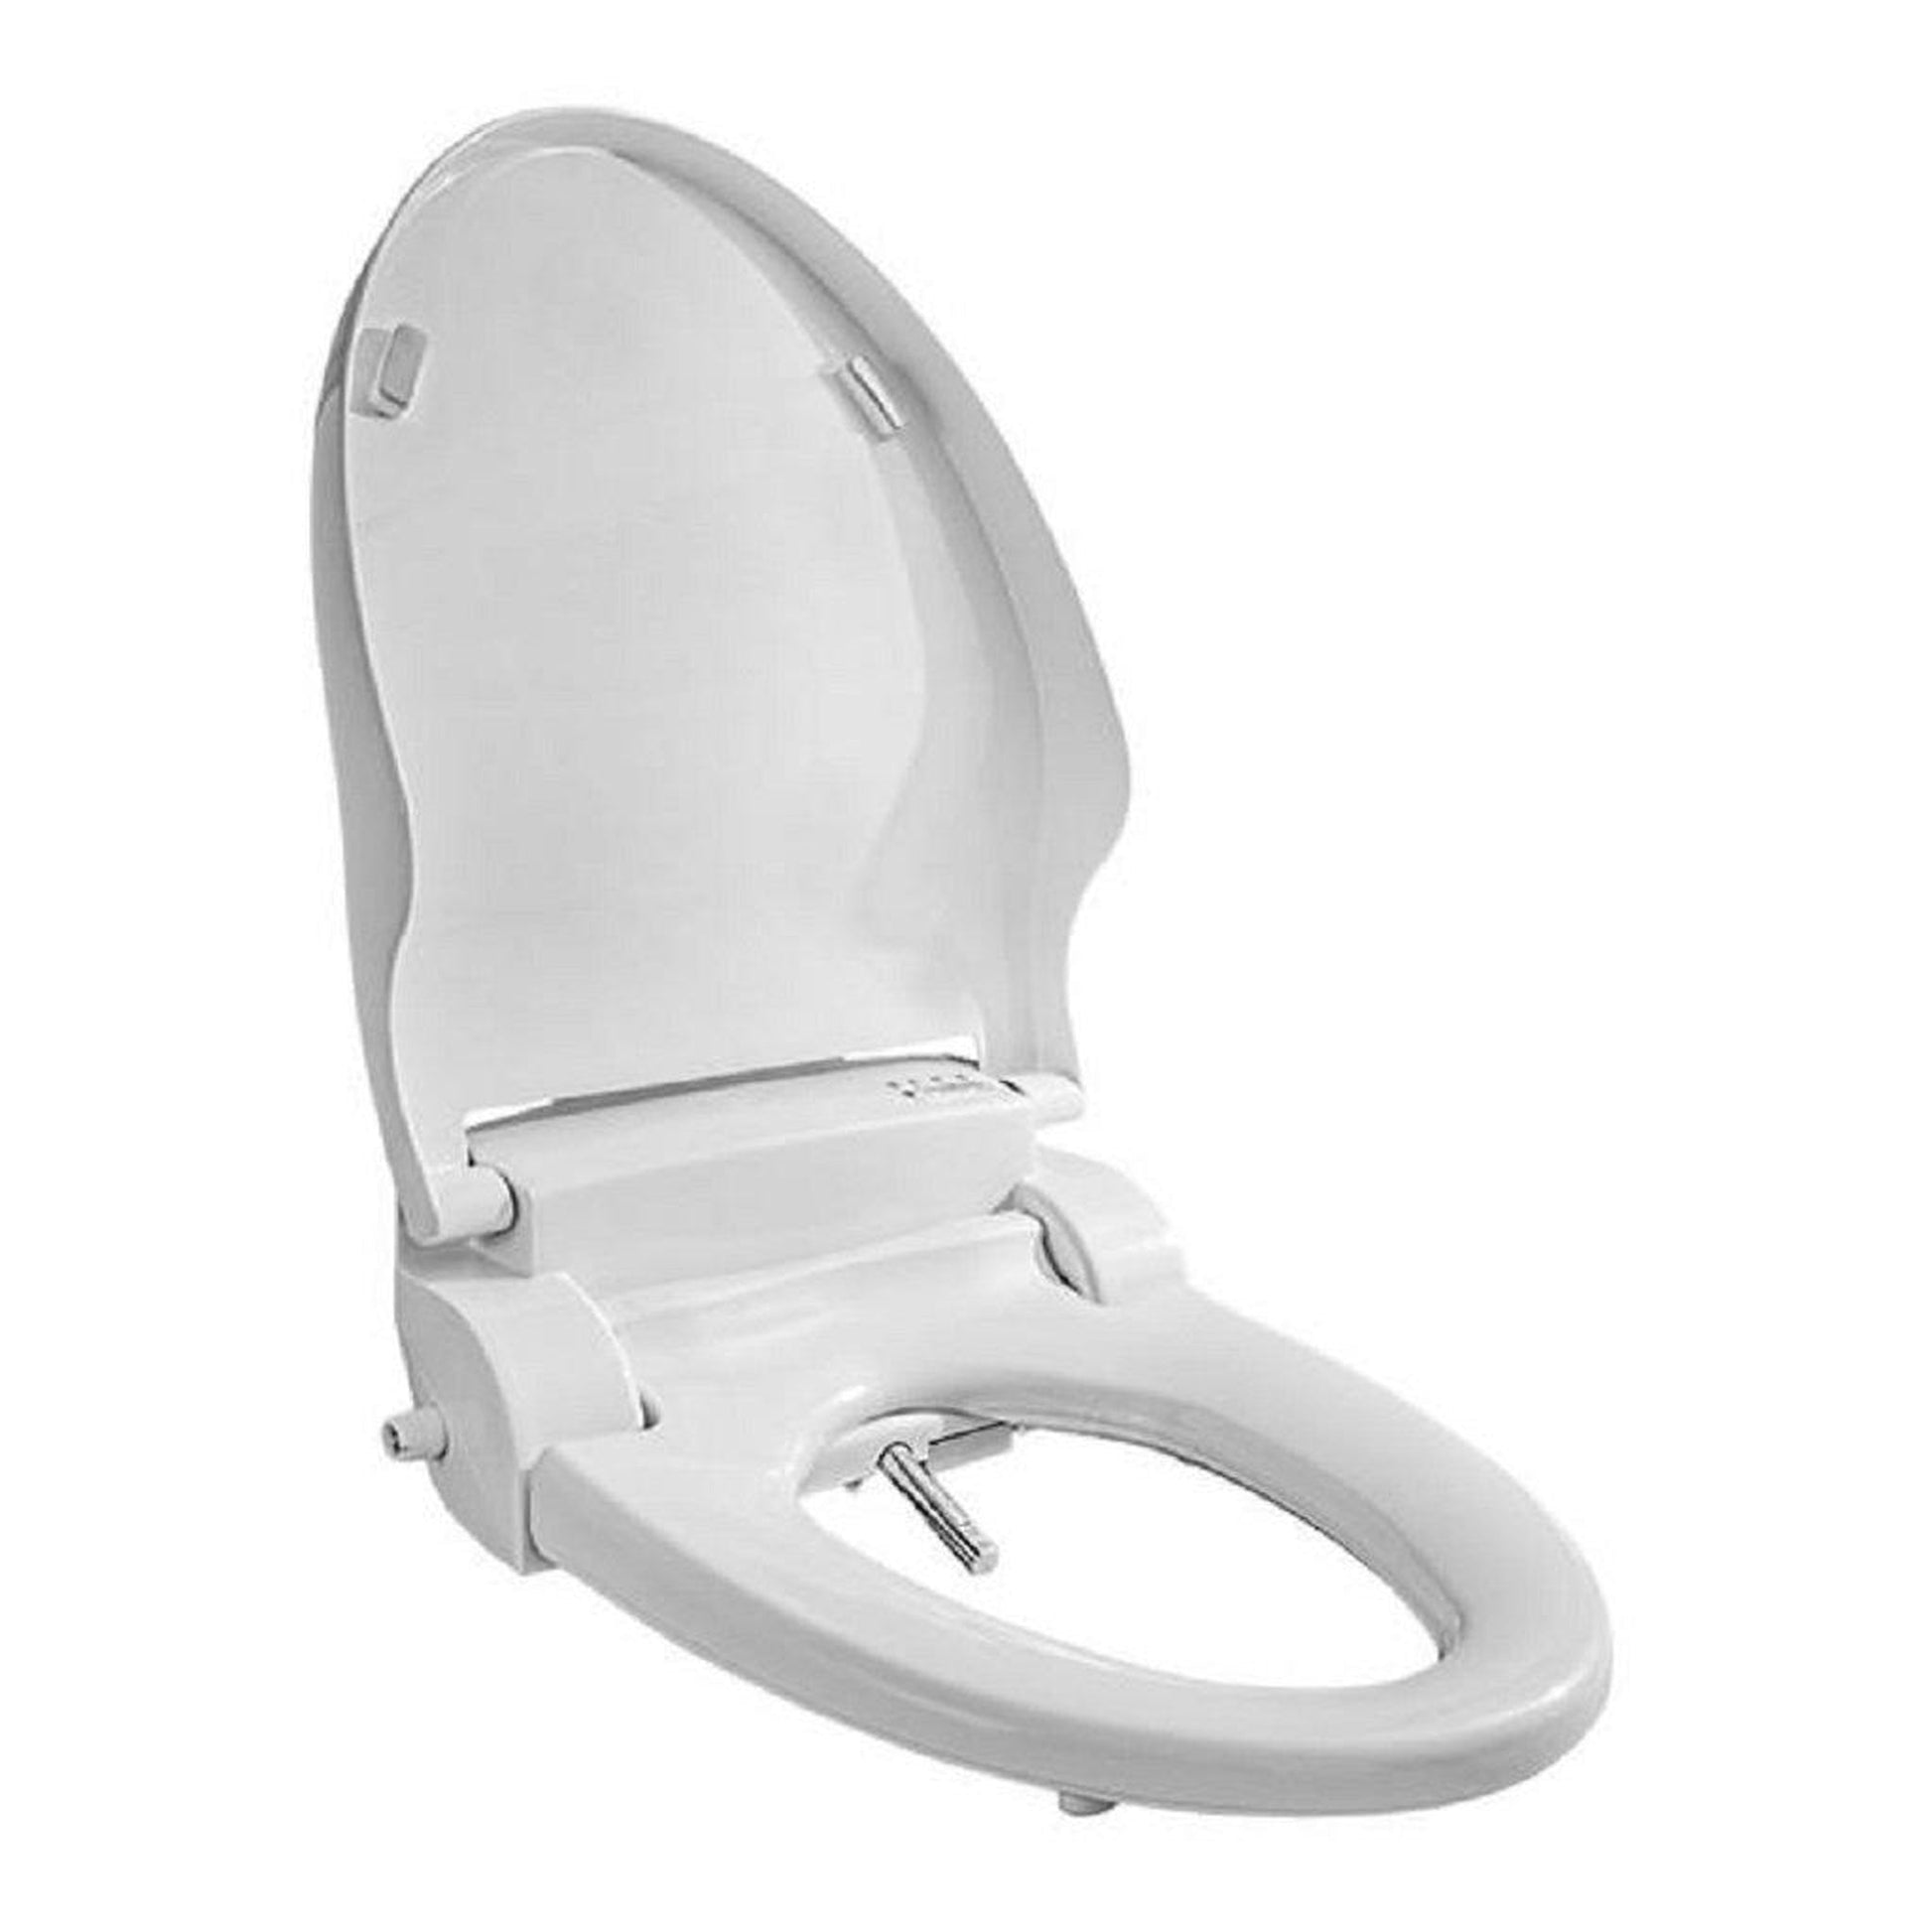 Dignity Solutions Cascade 3000 19" Round White Electric Bidet Toilet Seat With Large Remote Control